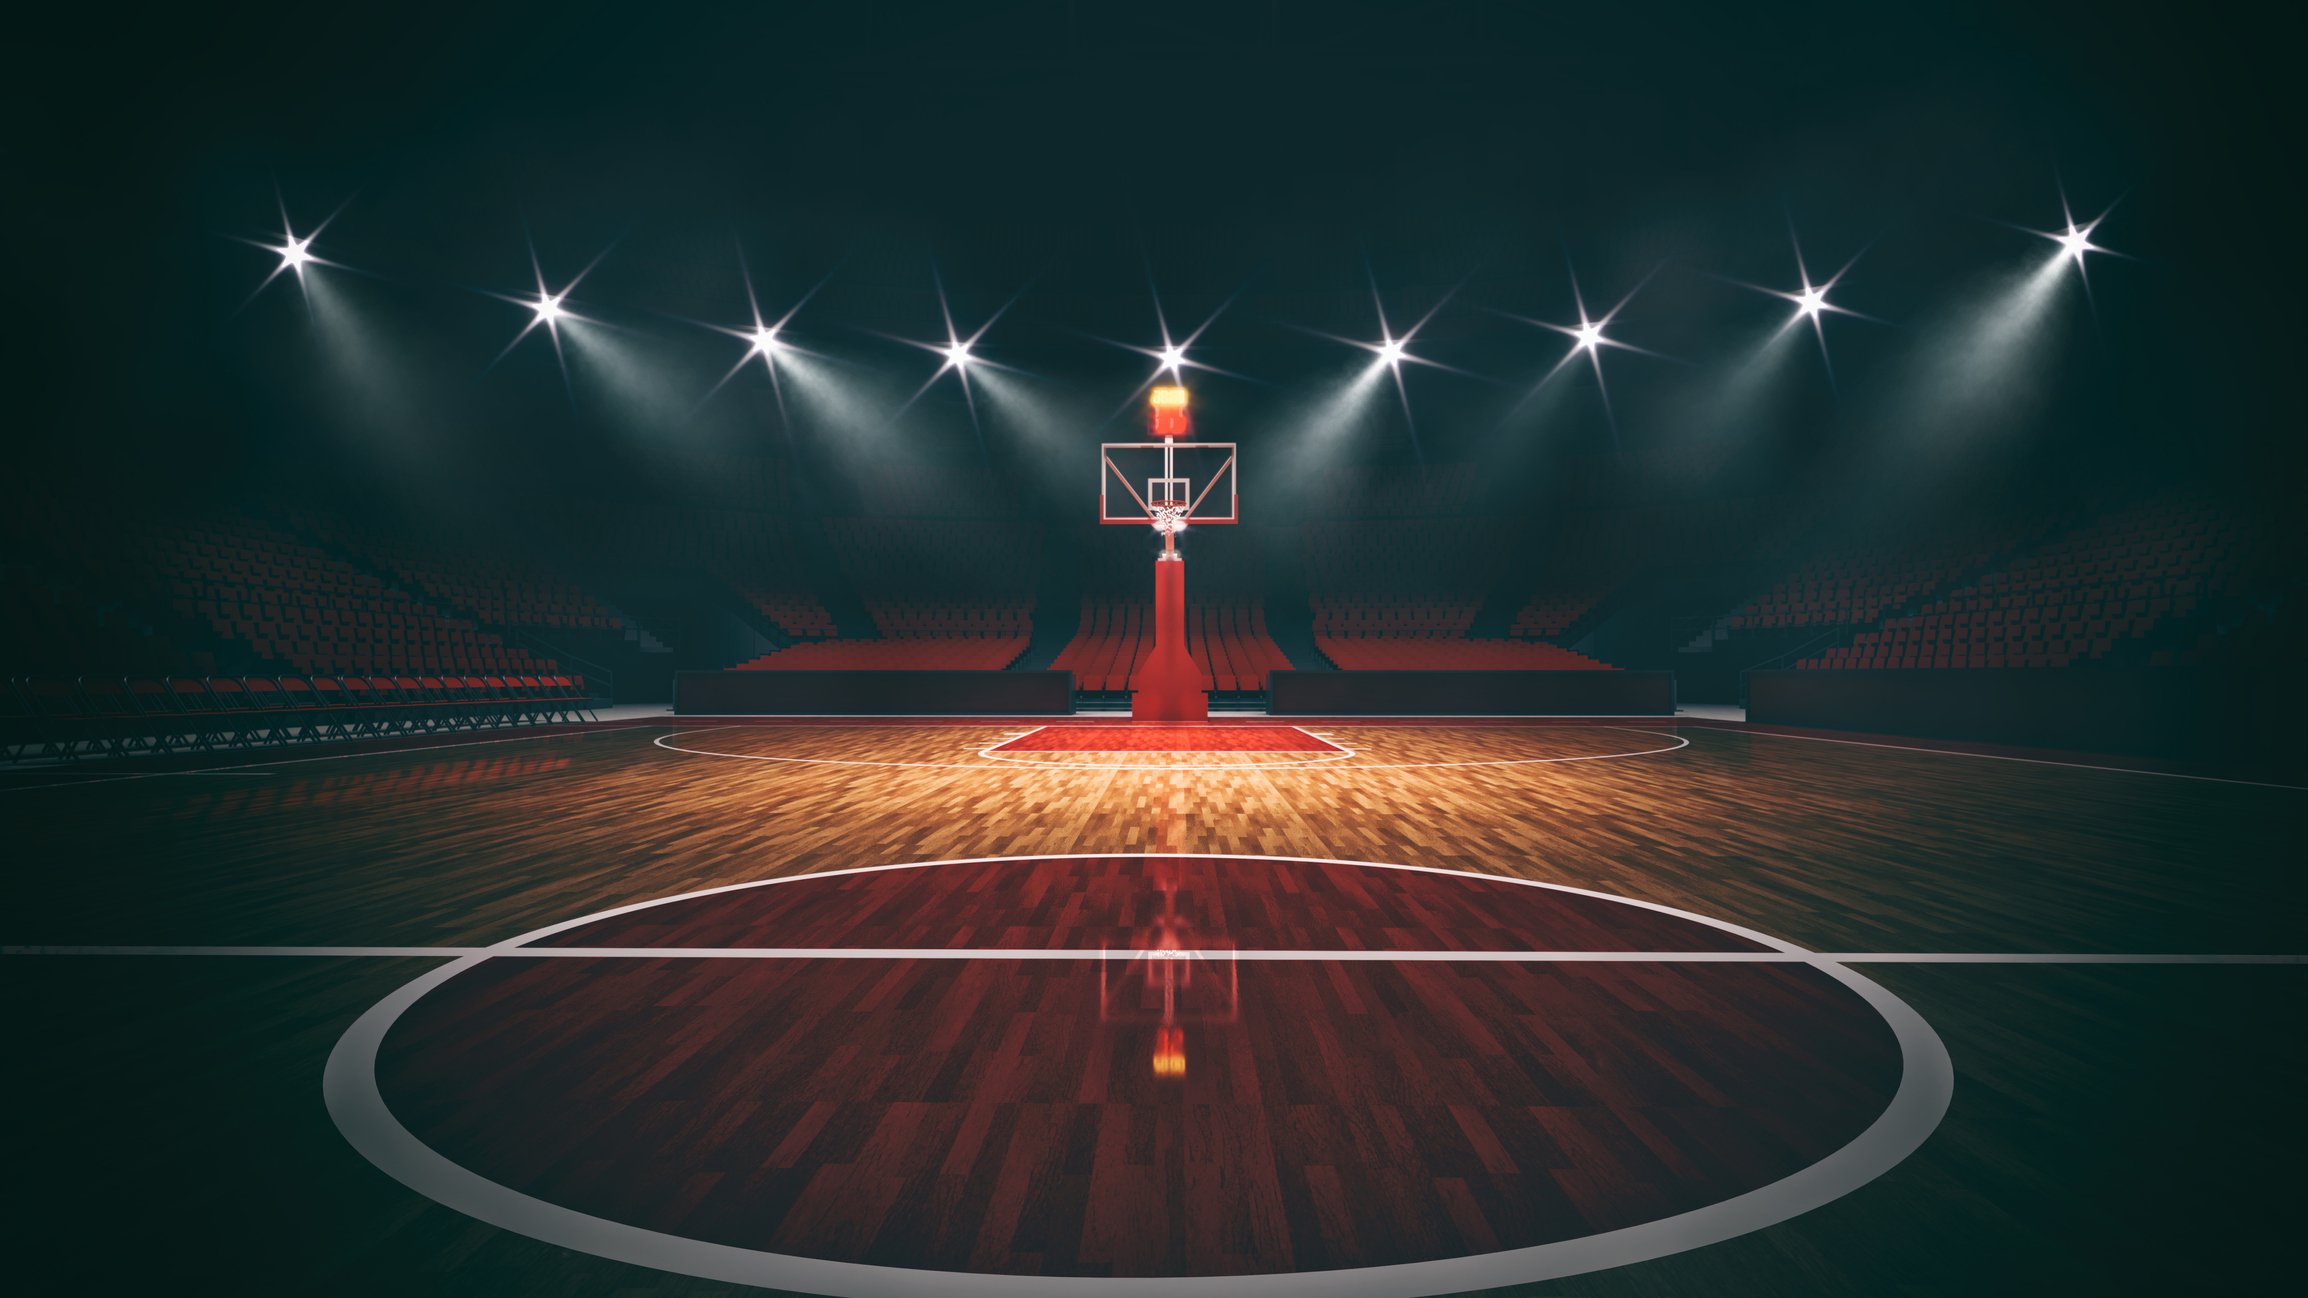 Interior view of an illuminated basketball stadium for a game